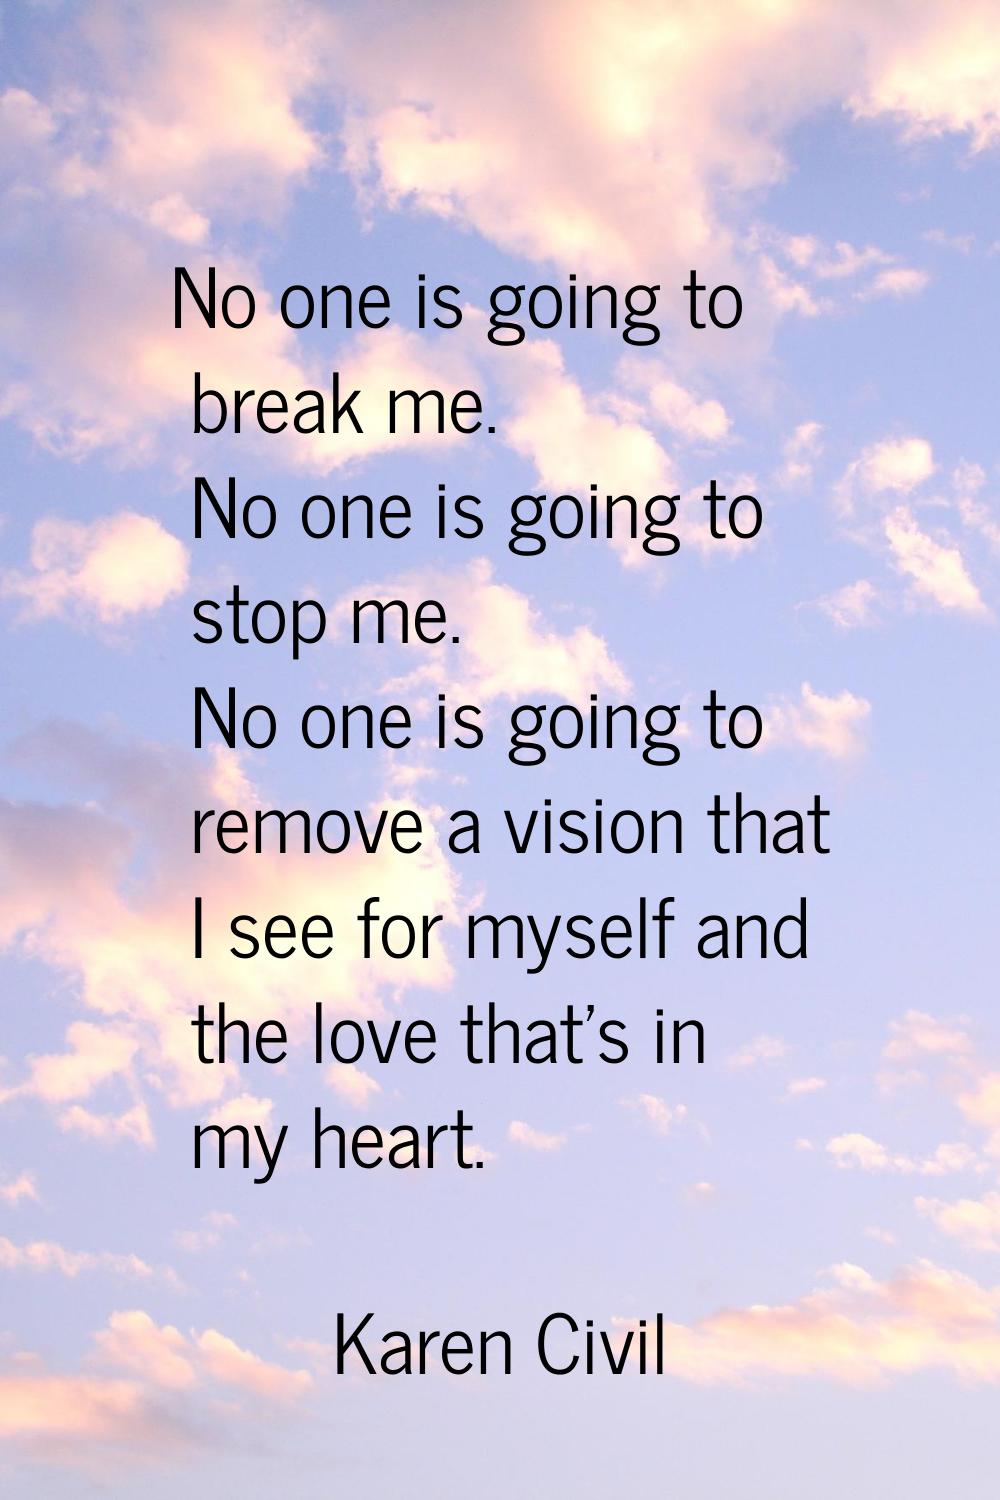 No one is going to break me. No one is going to stop me. No one is going to remove a vision that I 